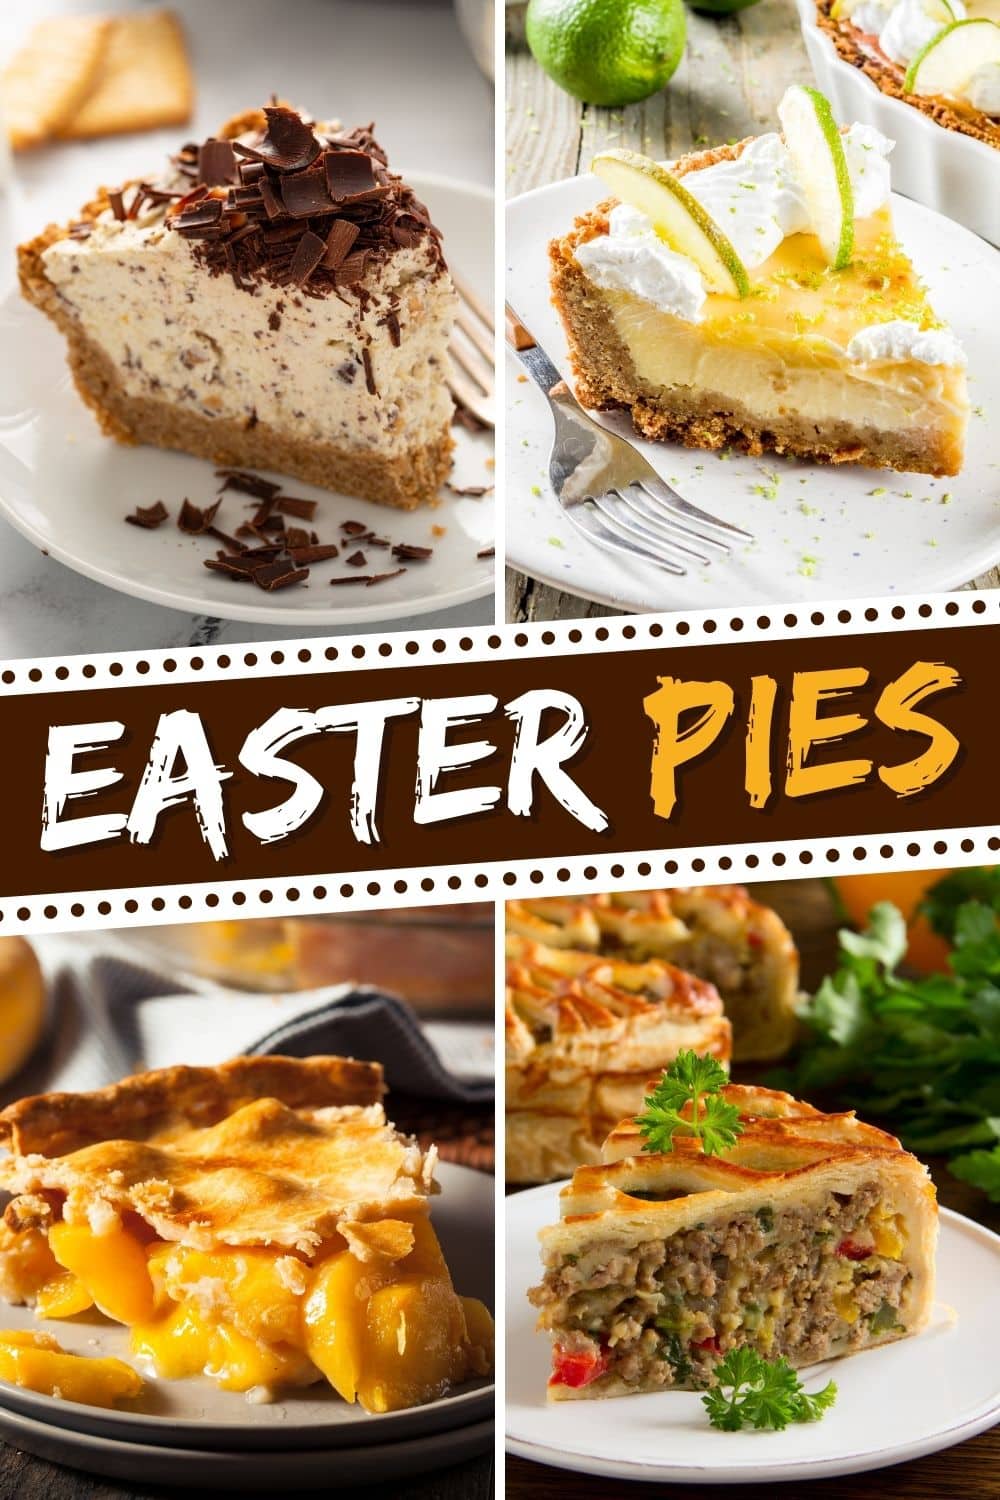 25 Best Easter Pies (+ Easy Recipes) - Insanely Good